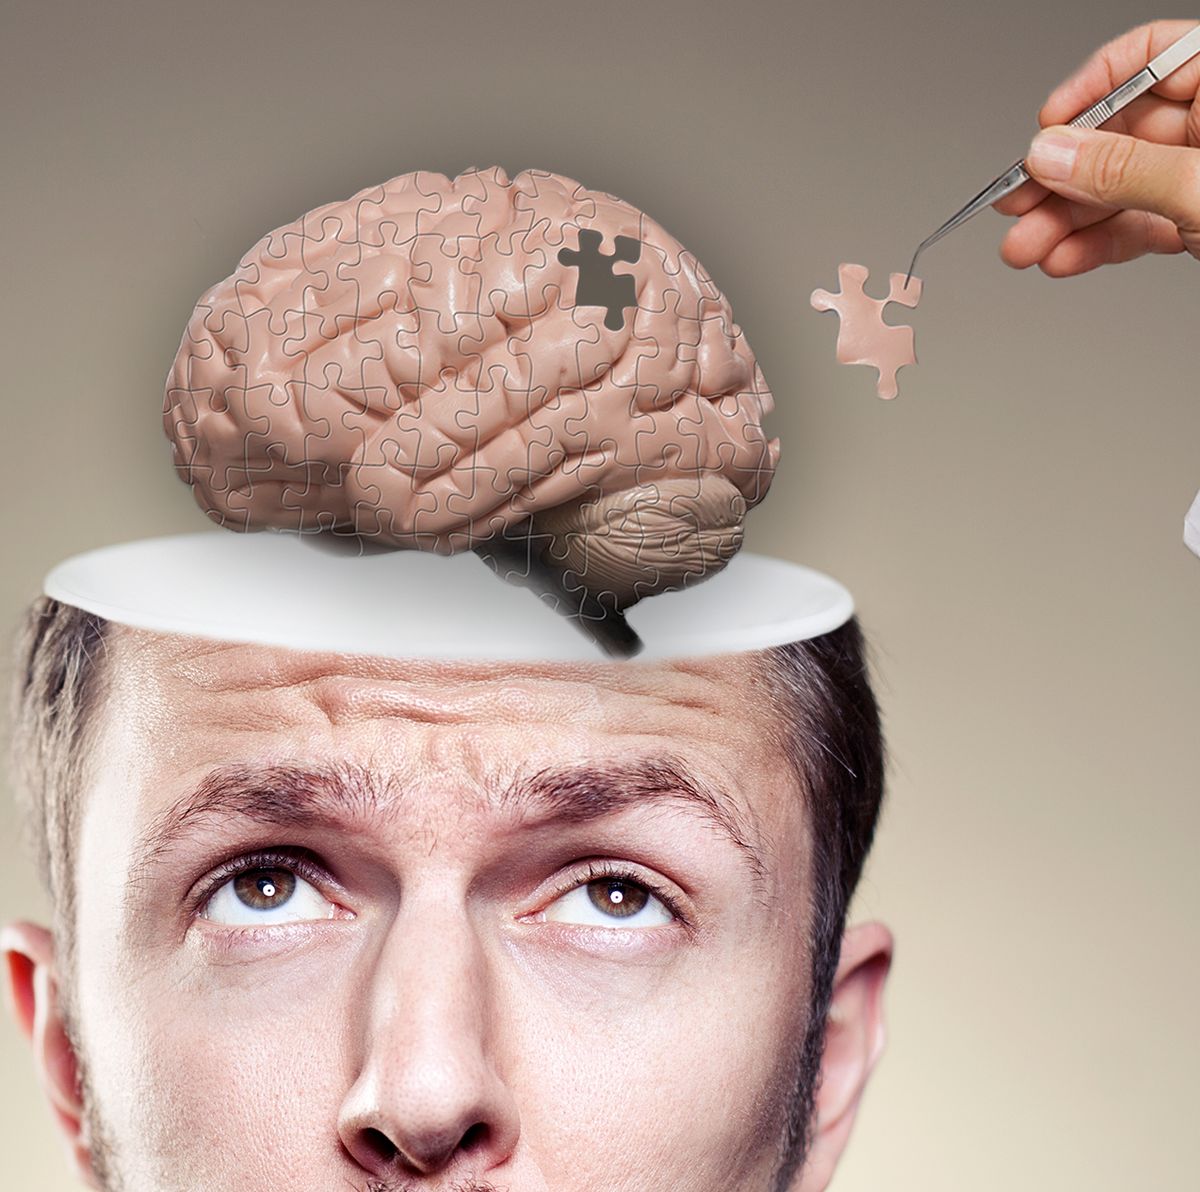 5 Facts That You Didn't Know About the Human Brain